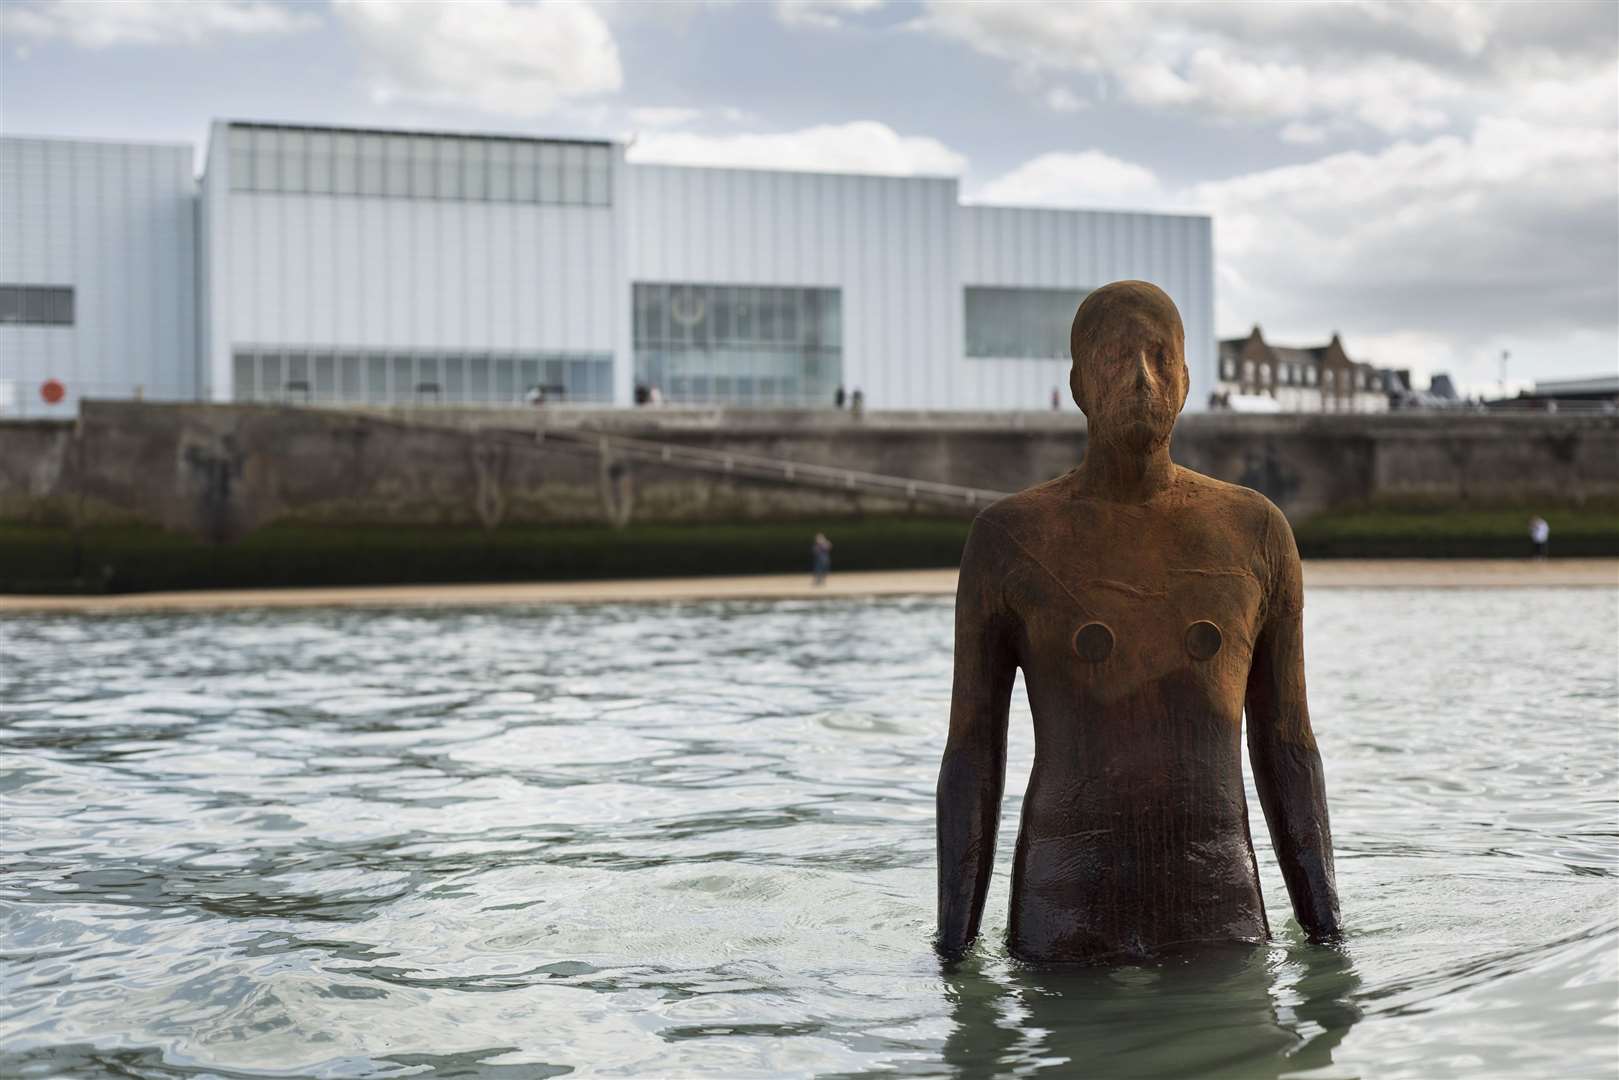 Antony Gormley's sculpture Another Time outside the Turner in Margate Picture: Thierry Bal